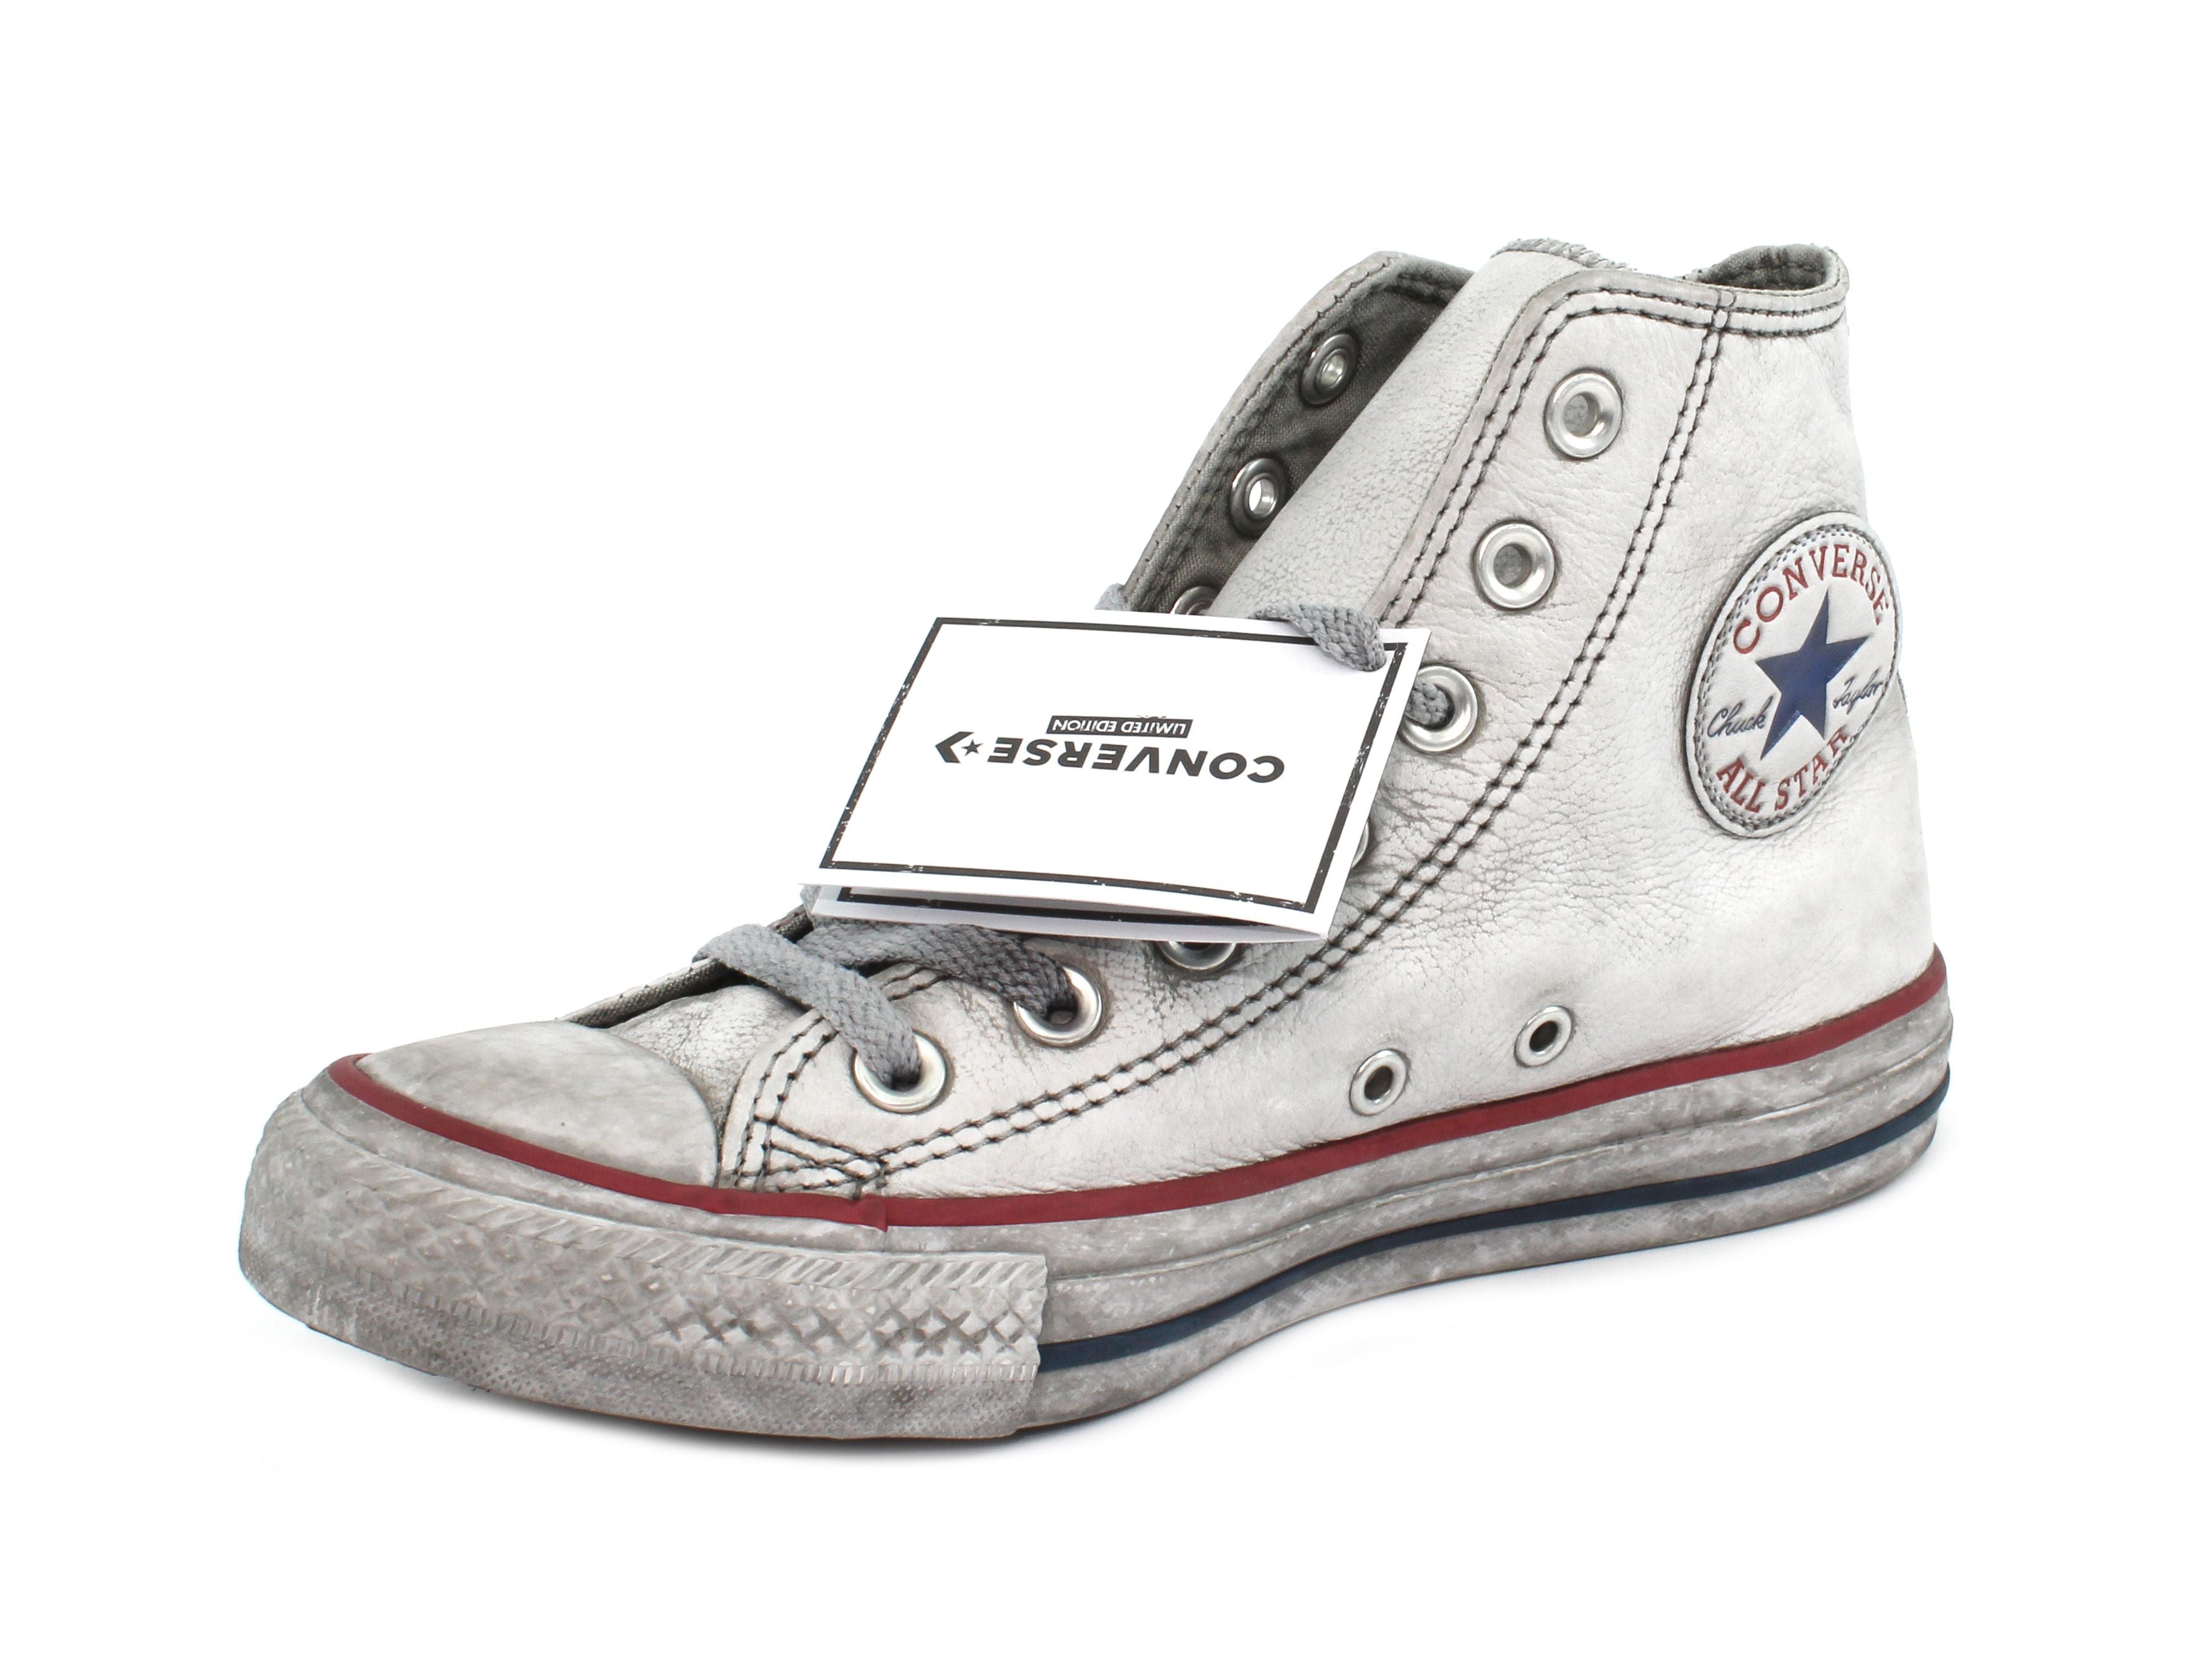 Sneaker CONVERSE Vintage Leather 158576C White/Gray online